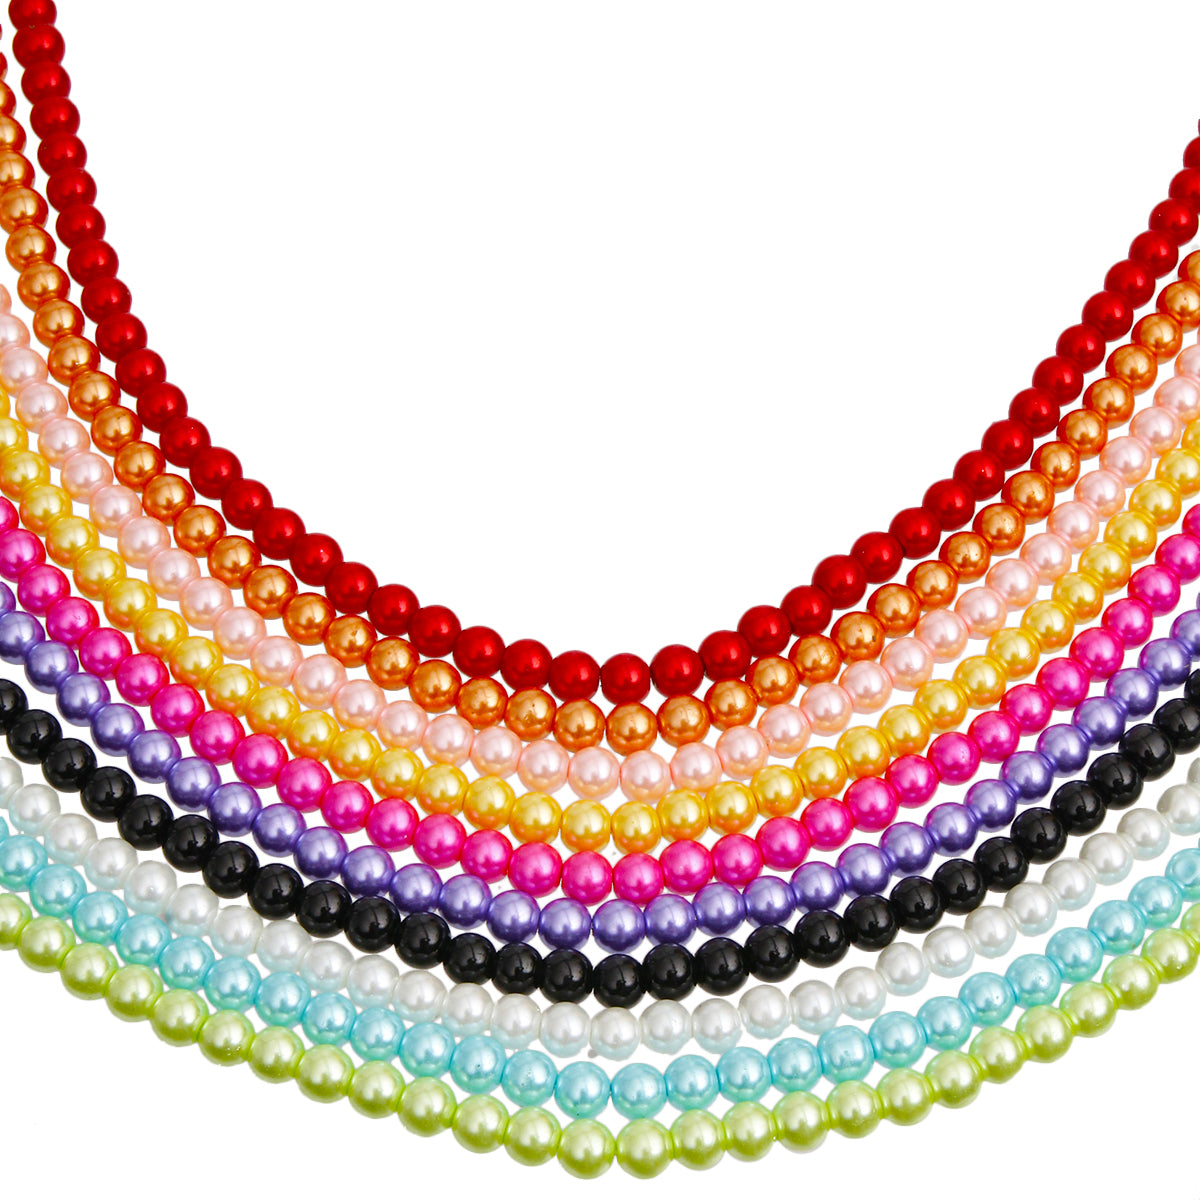 Dozen Solid Colored Pearl Necklace, Earring, and Bracelet Sets